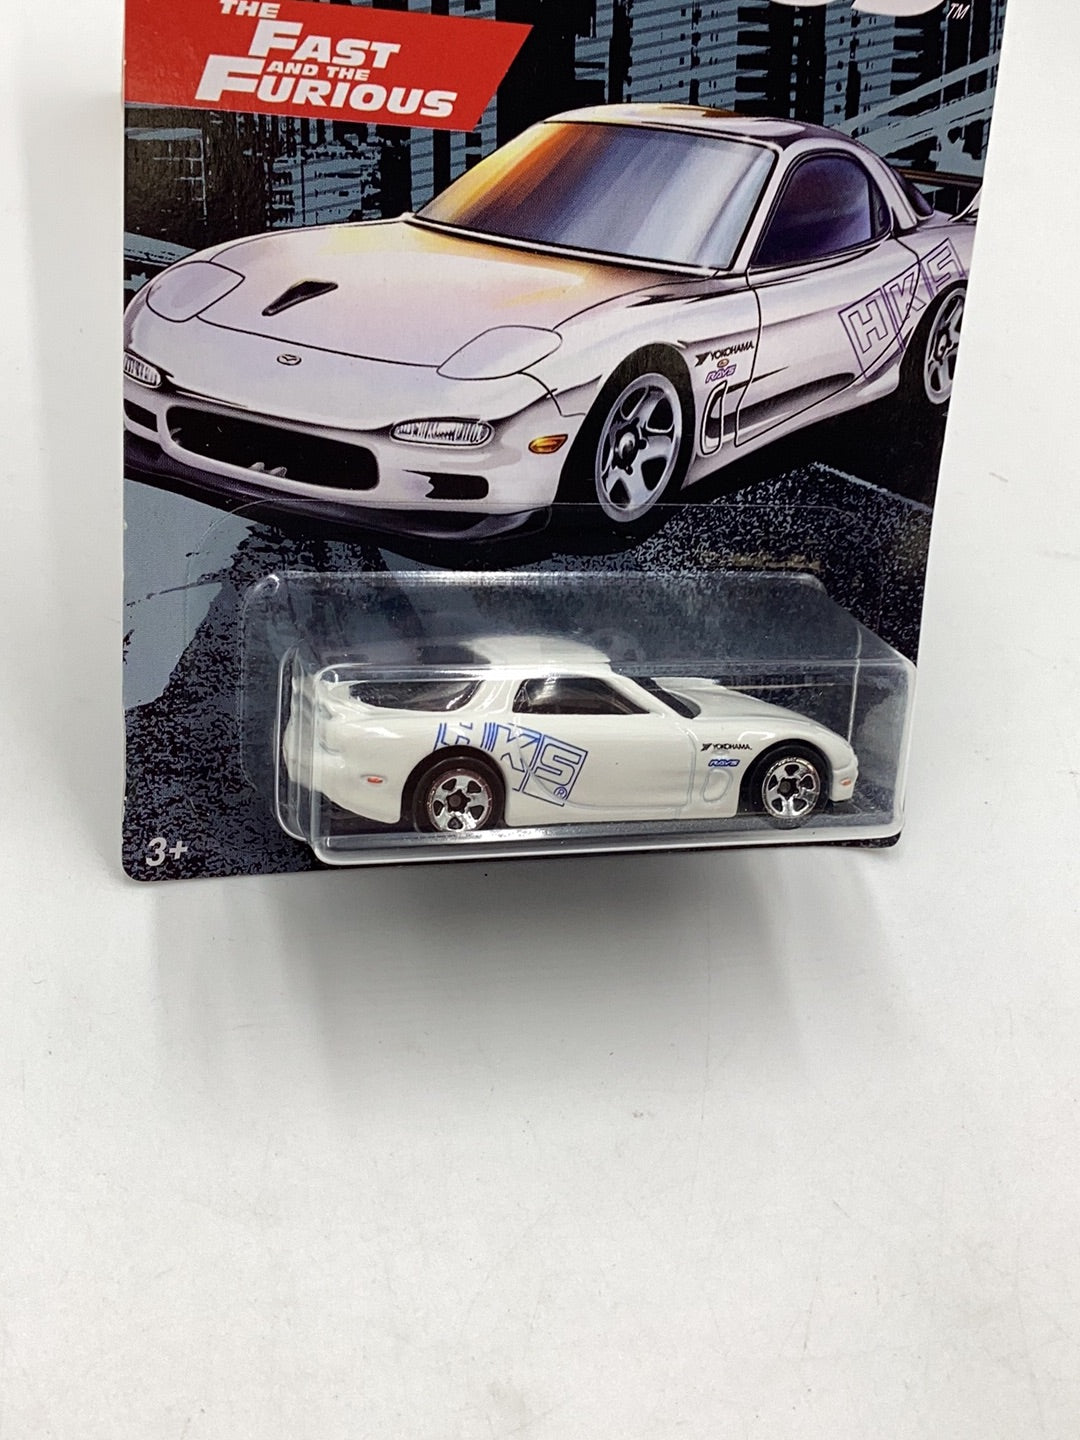 Hot wheels fast and furious 2/6 95 Mazda RX-7 152C